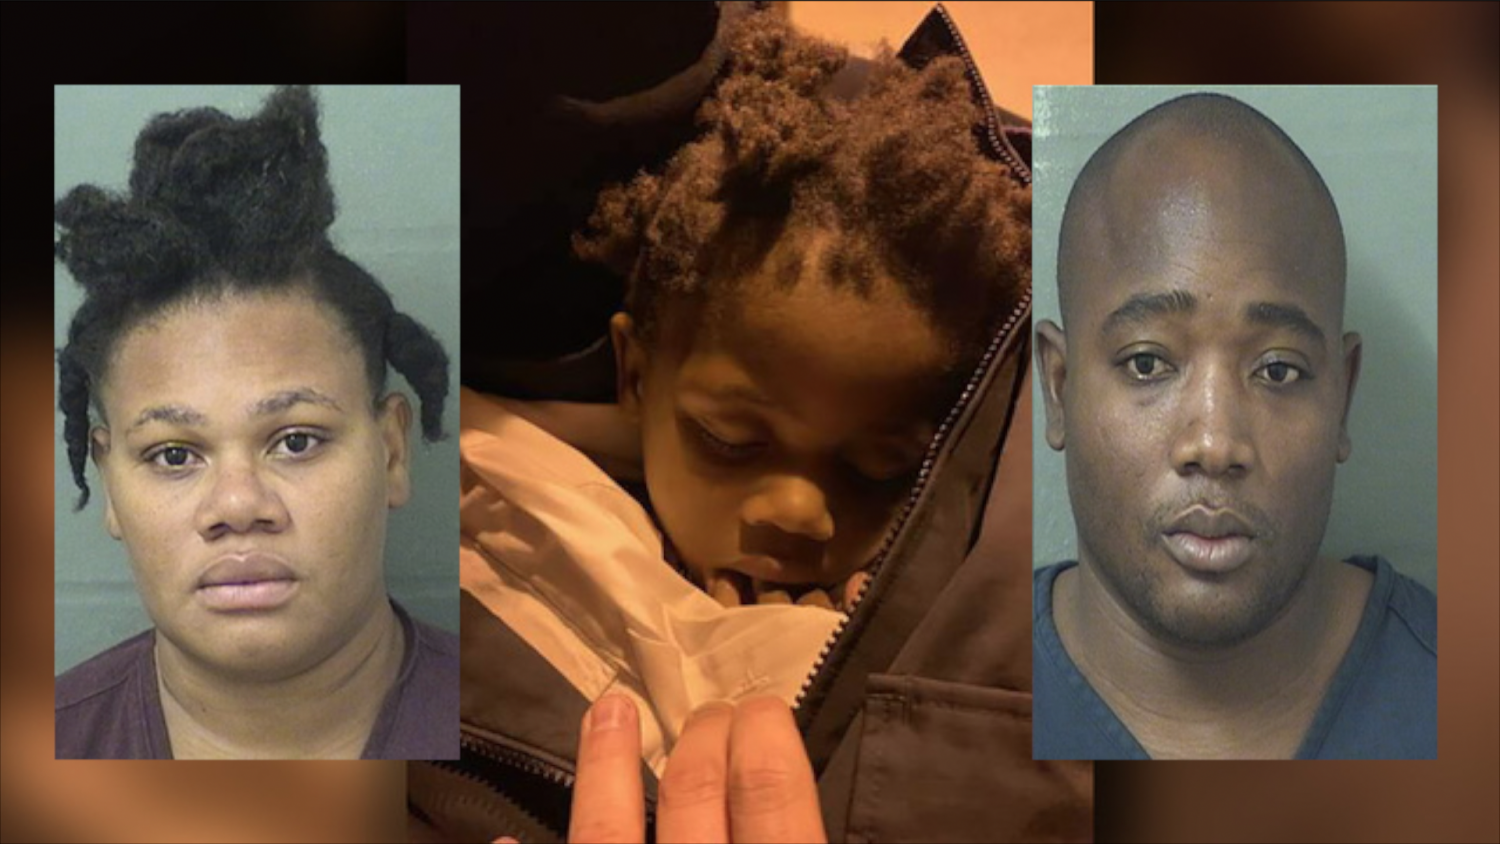 Florida Couple Left Their Toddler at the Park for Hours, Charged With Child Neglect